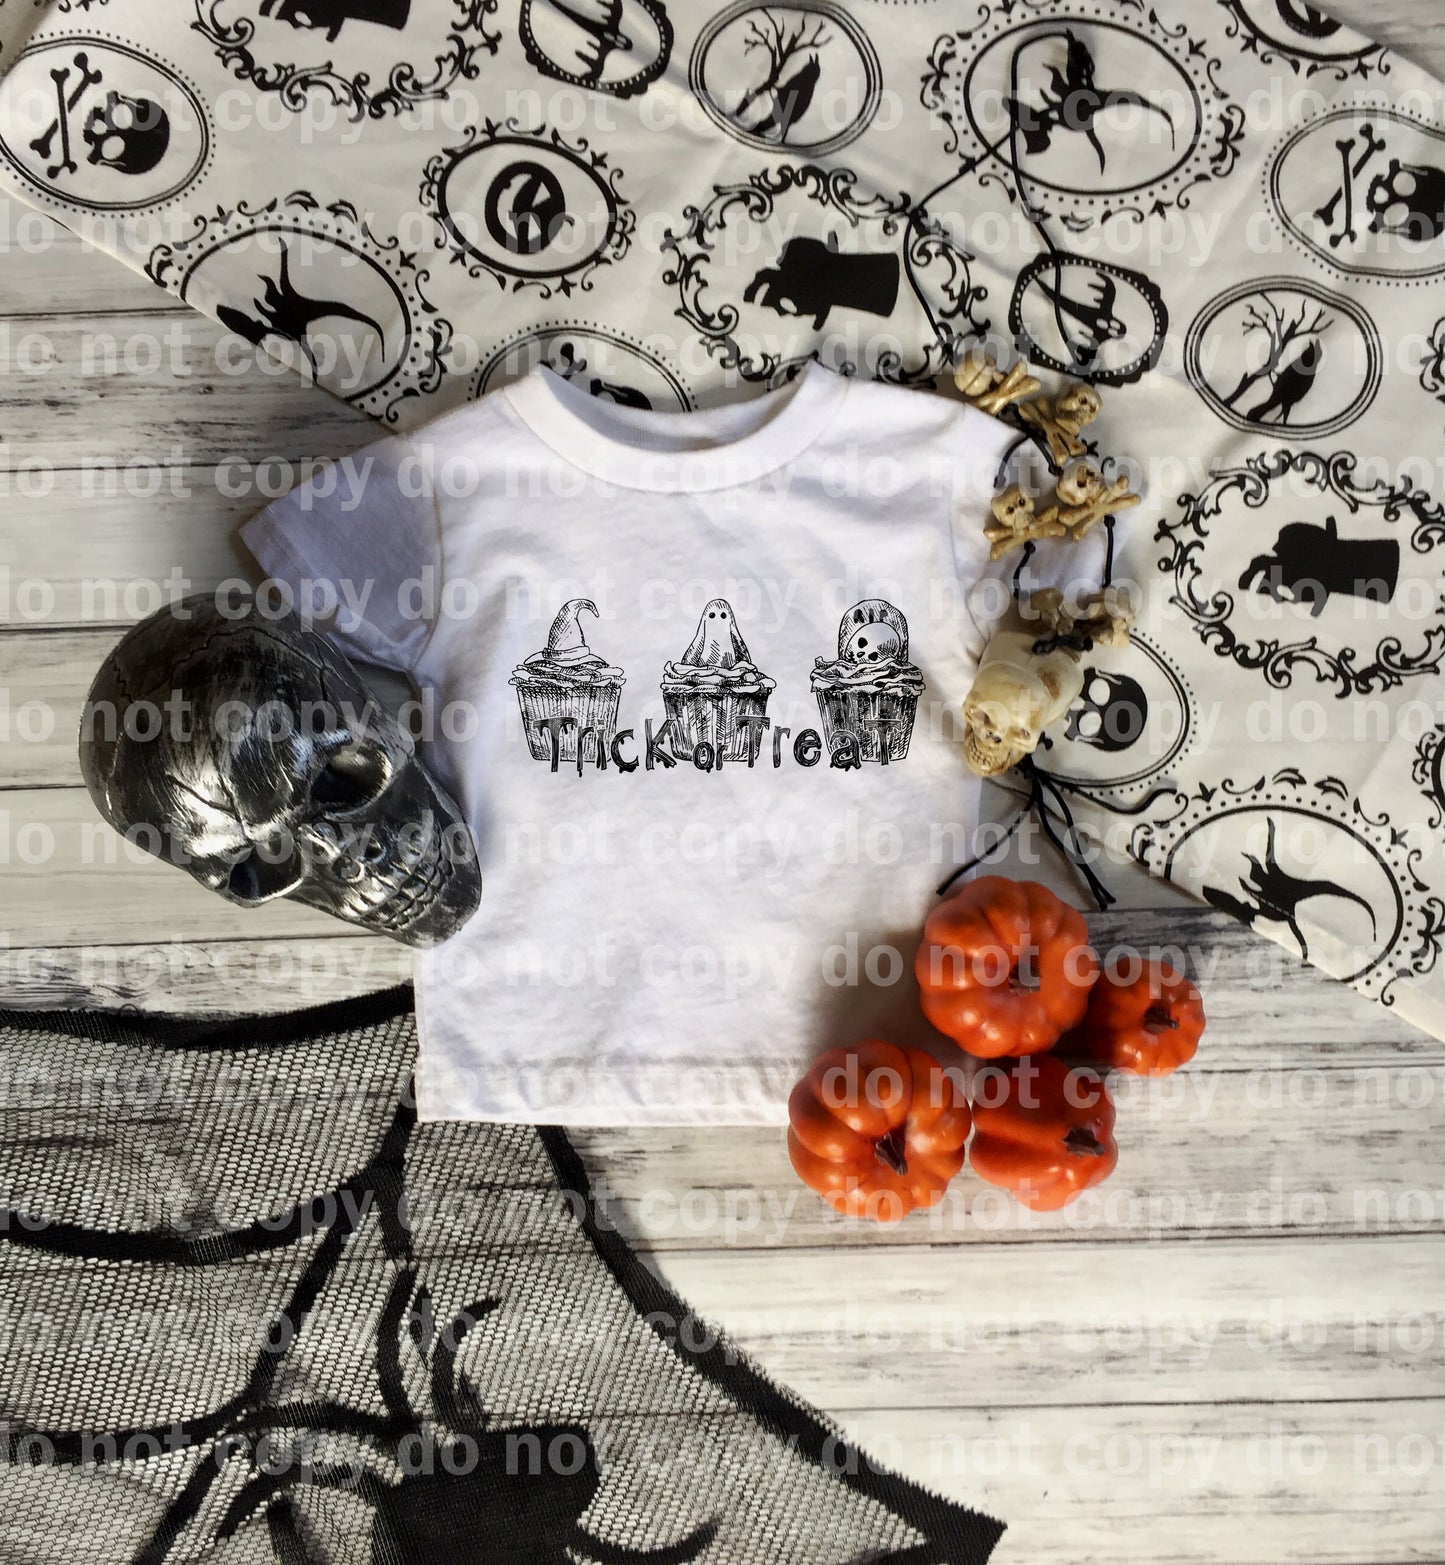 Trick or Treat Cupcakes Full Color/One Color Dream Print or Sublimation Print